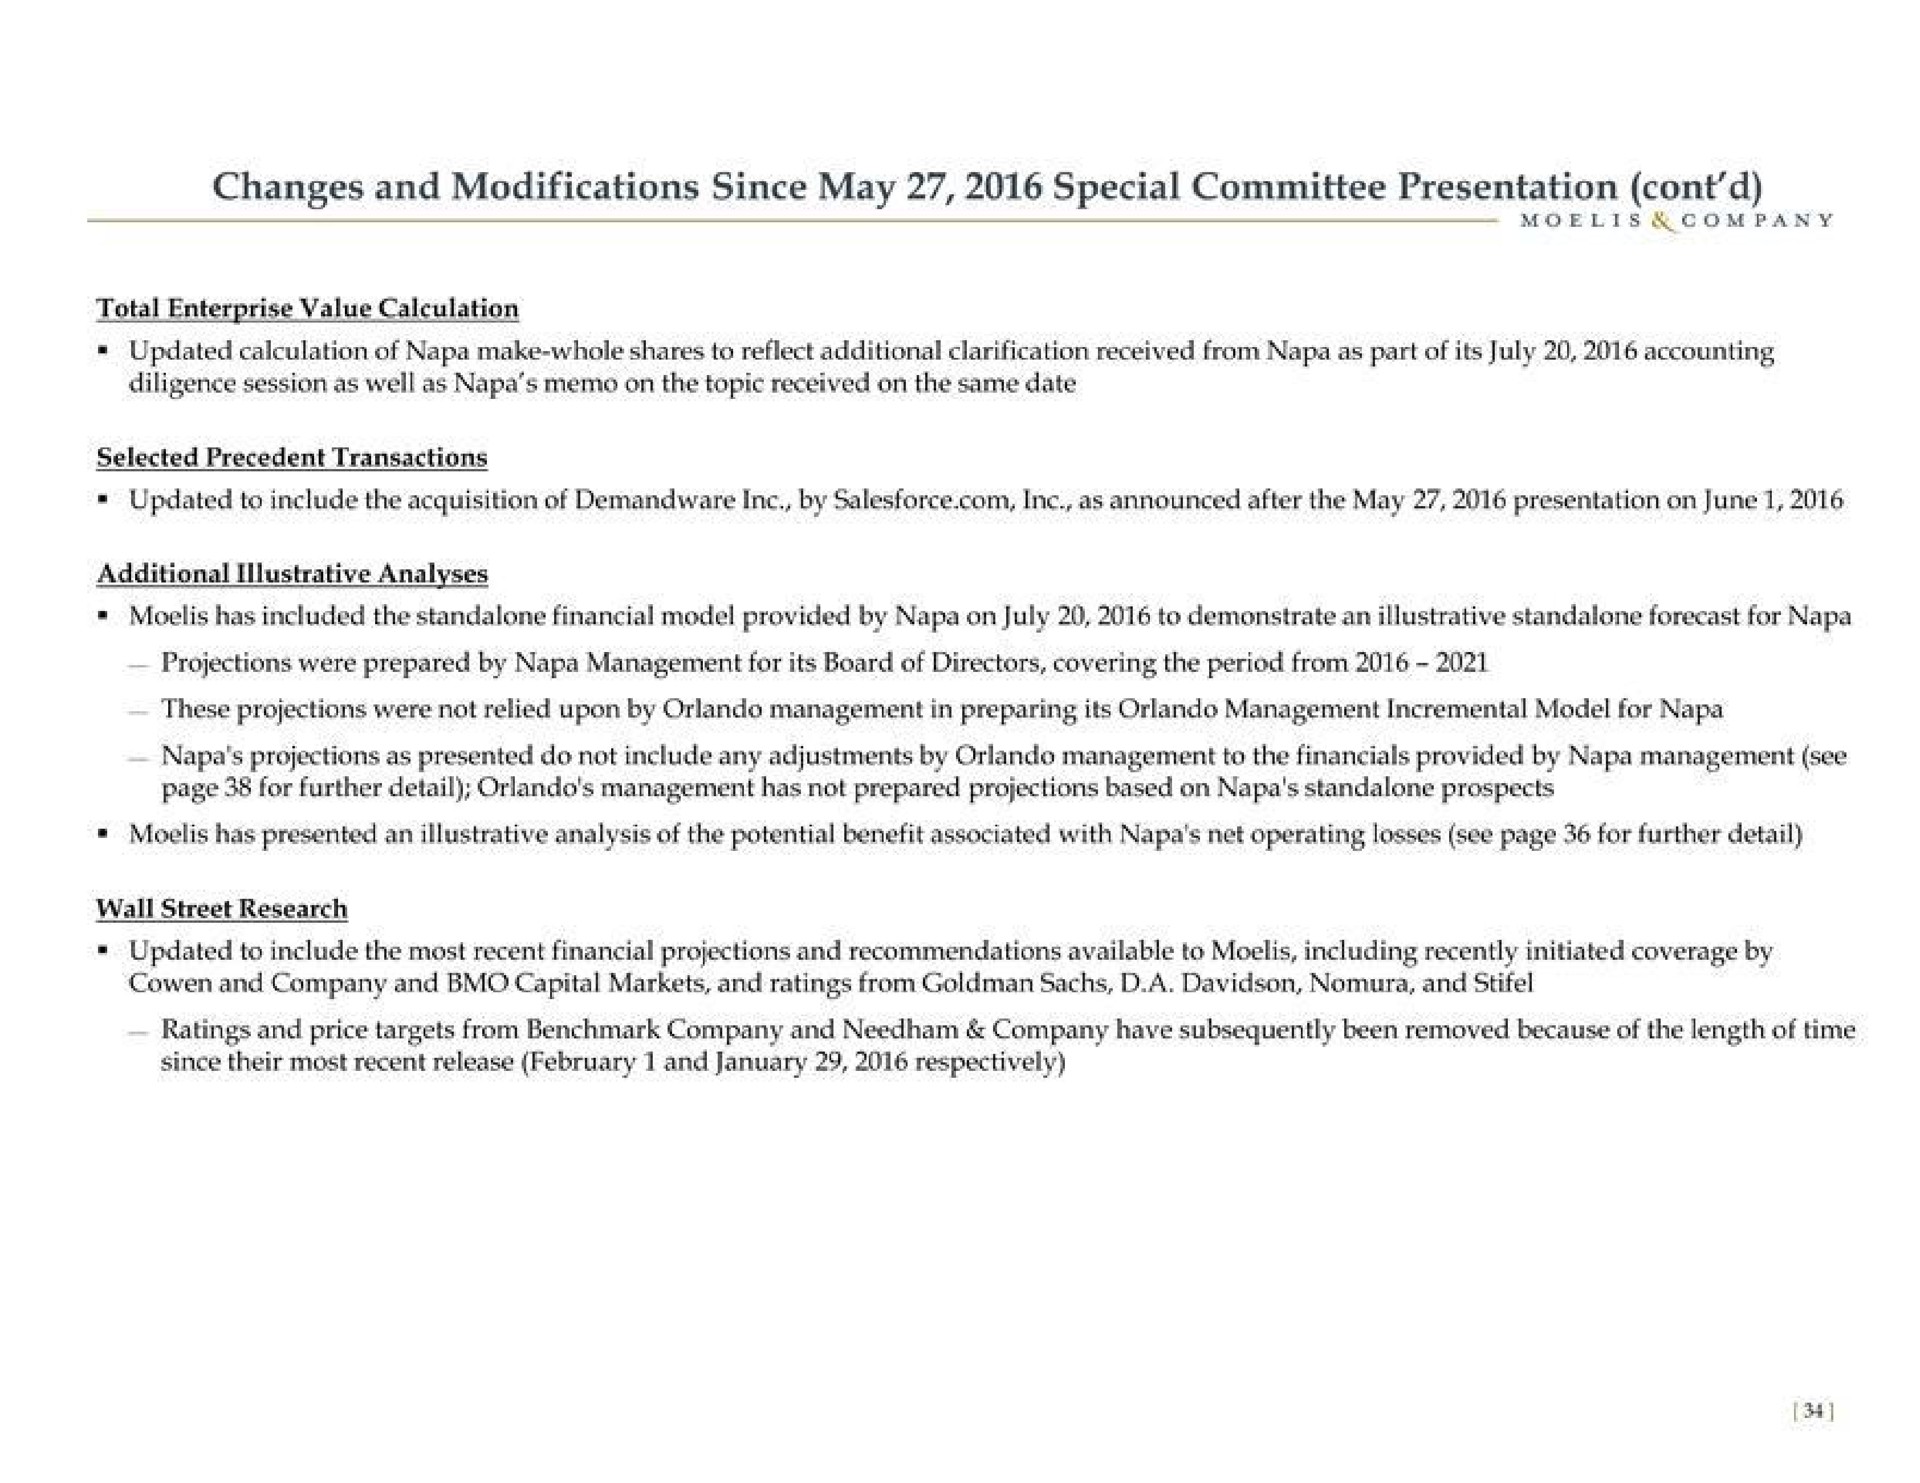 changes and modifications since may special committee presentation | Moelis & Company